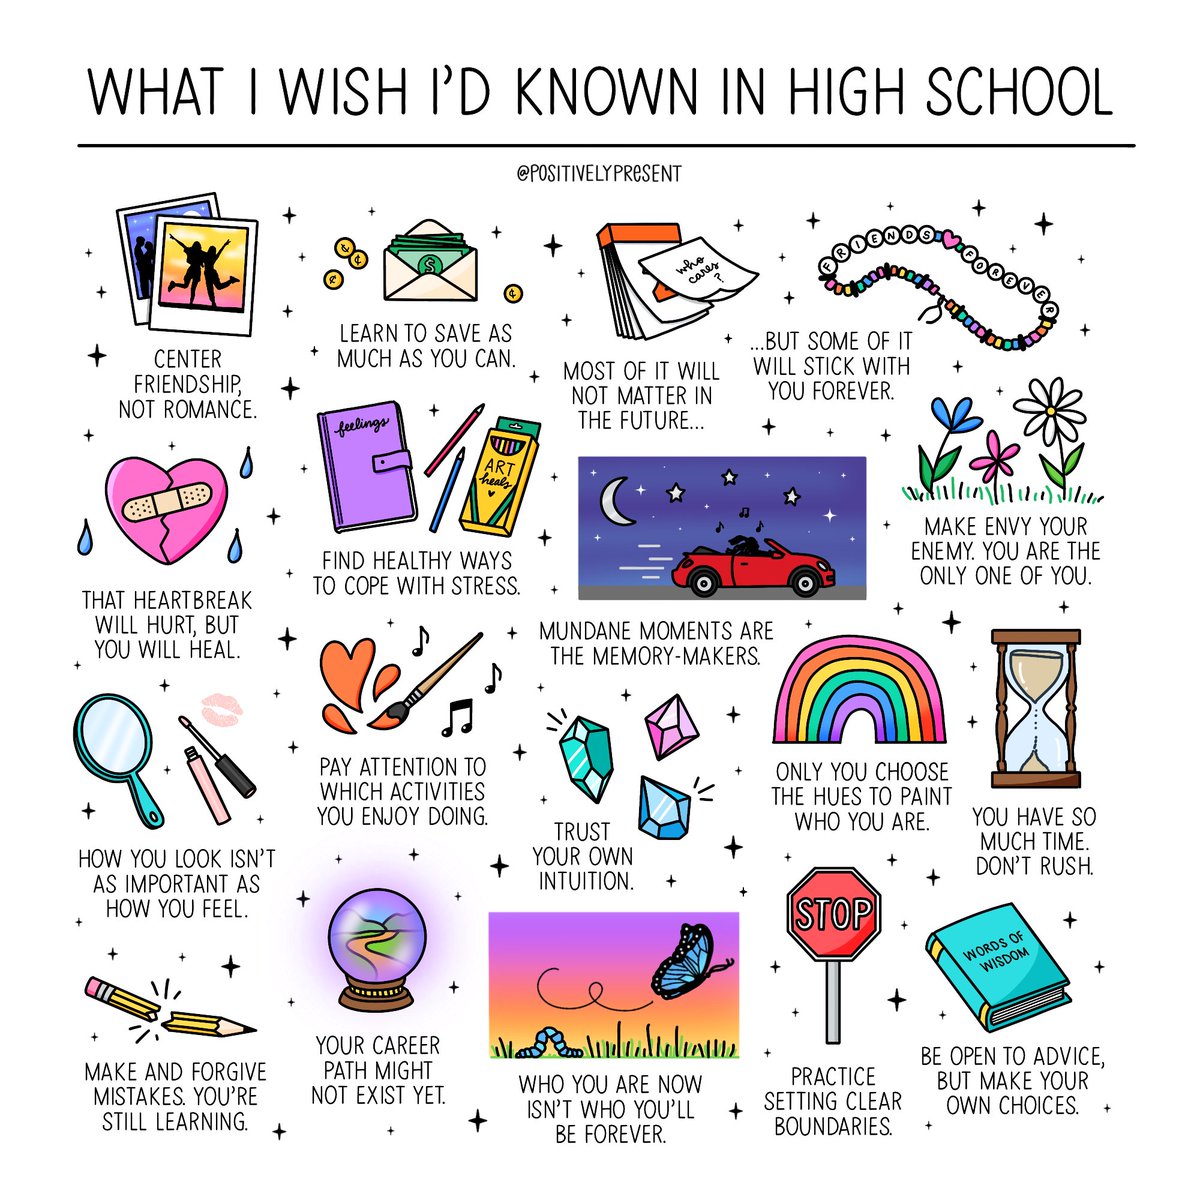 What do you wish you’d known in high school?